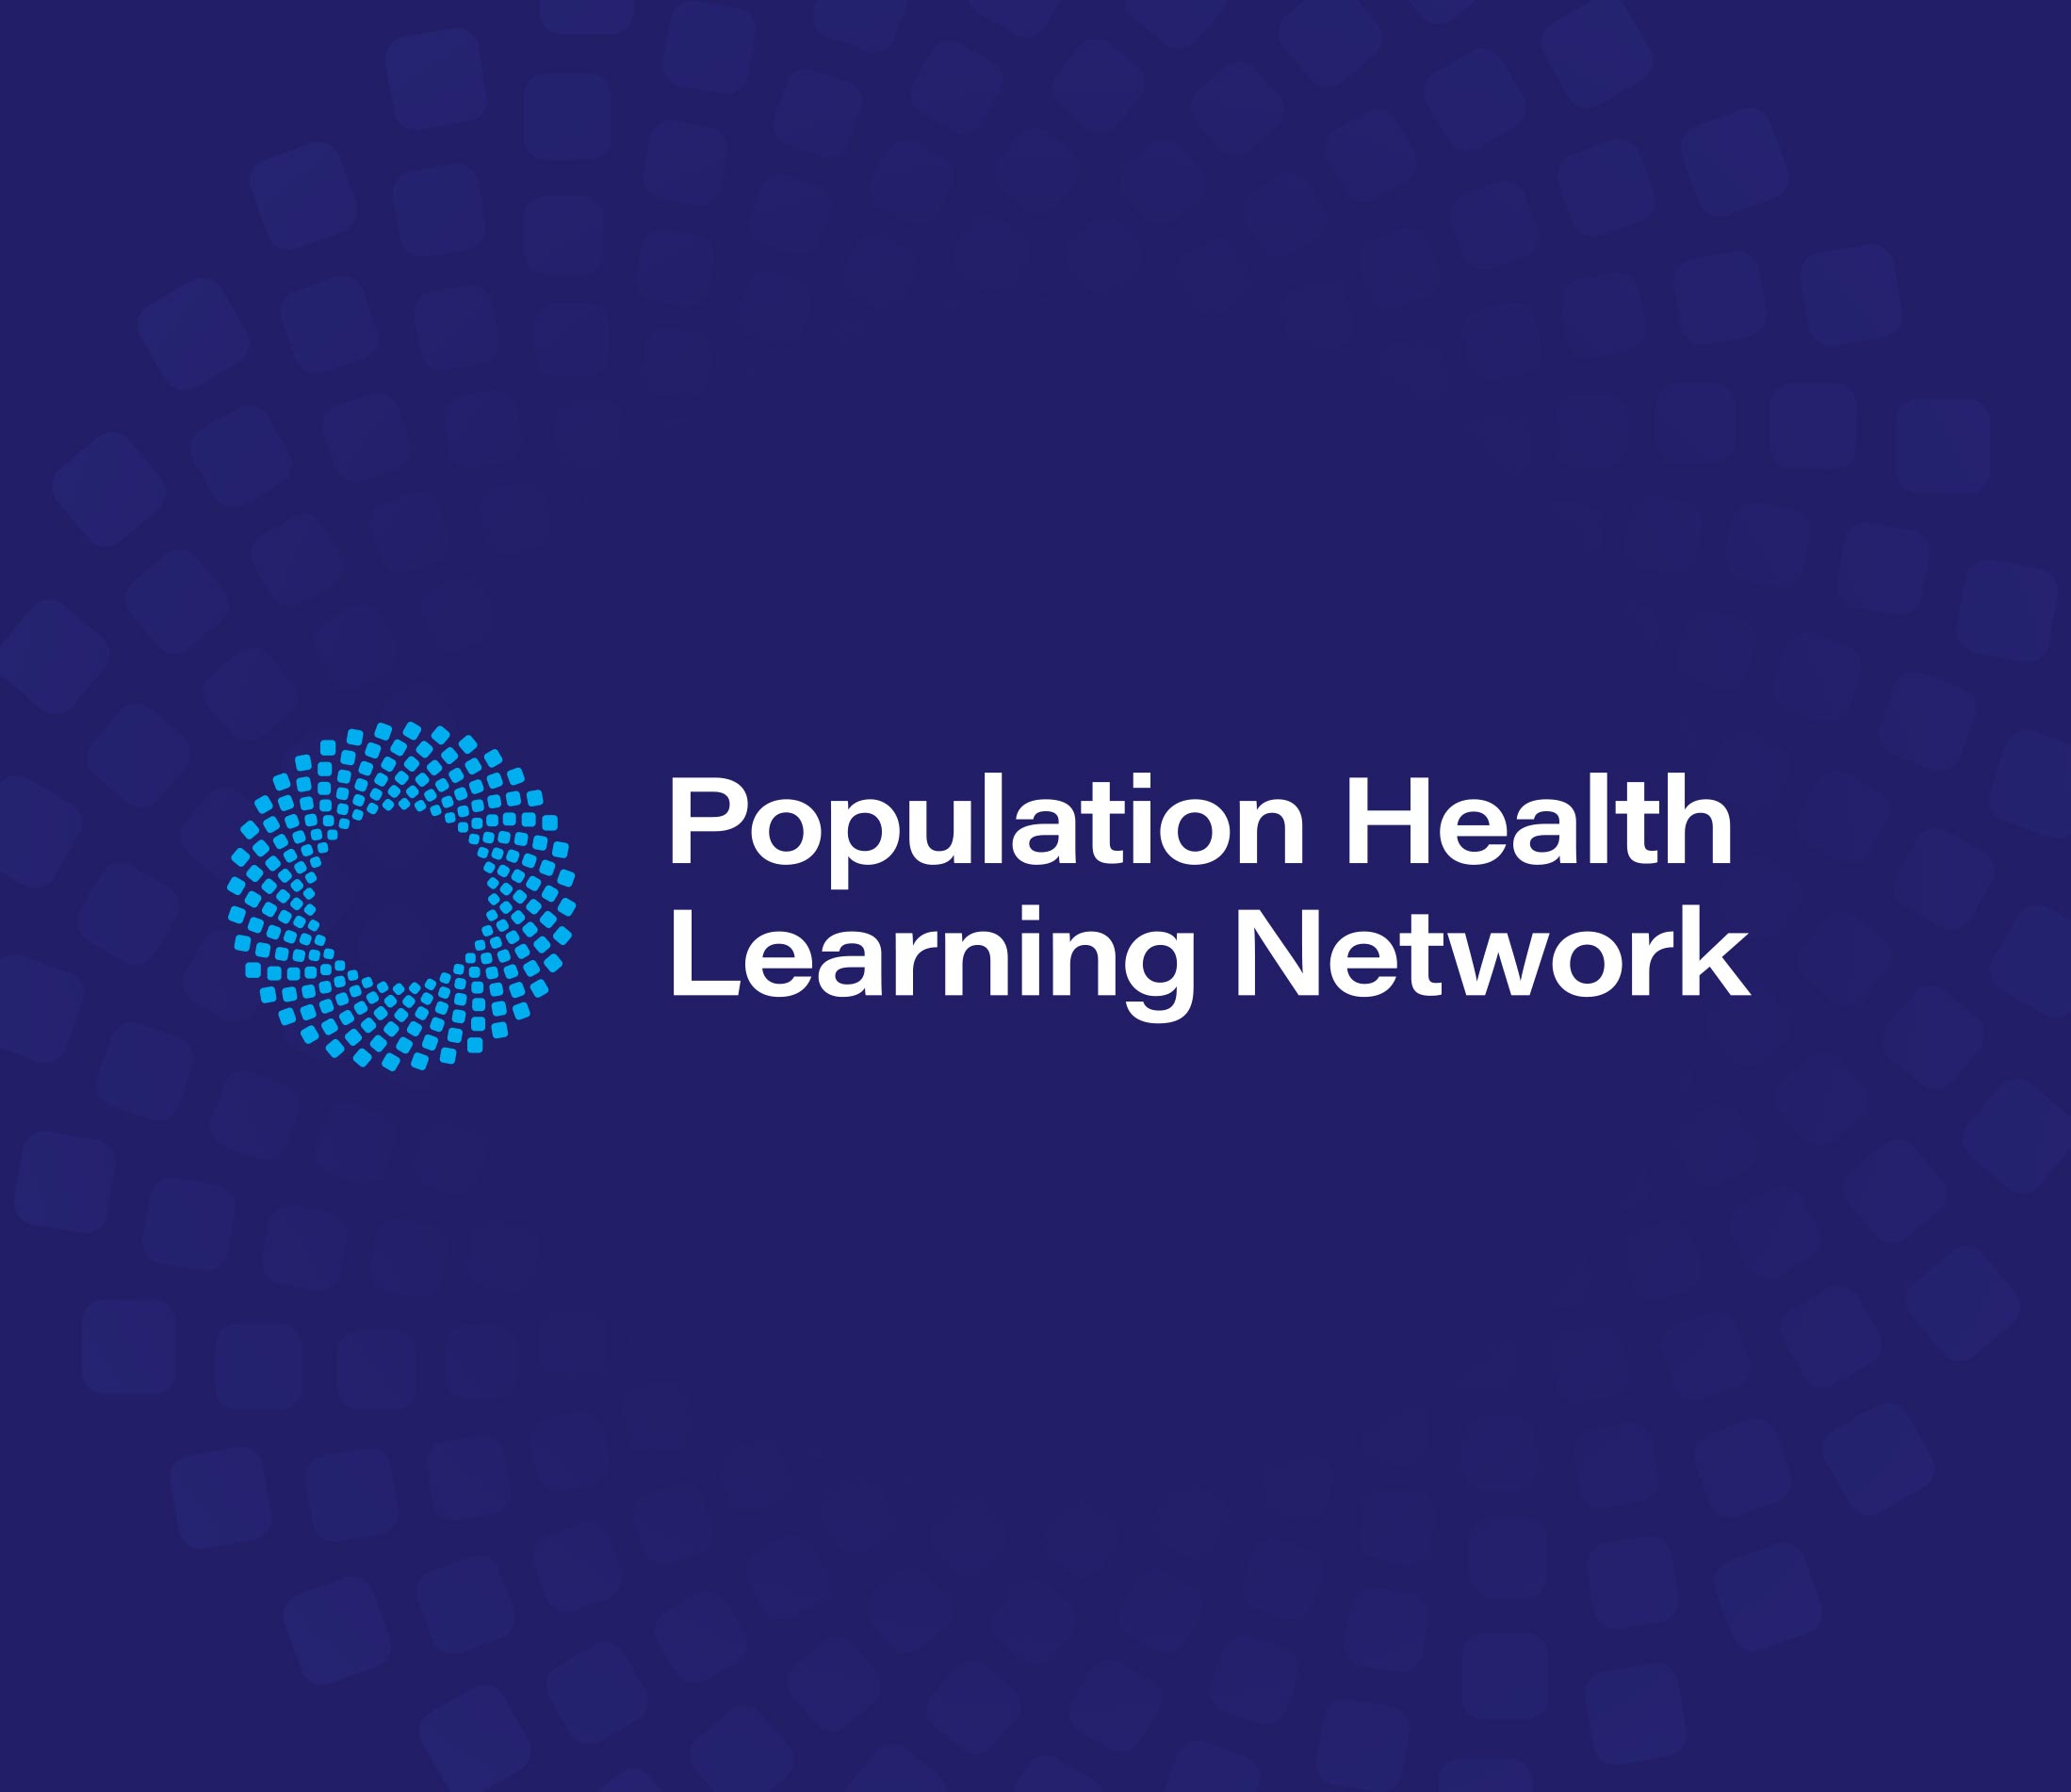 Population Health Learning Network